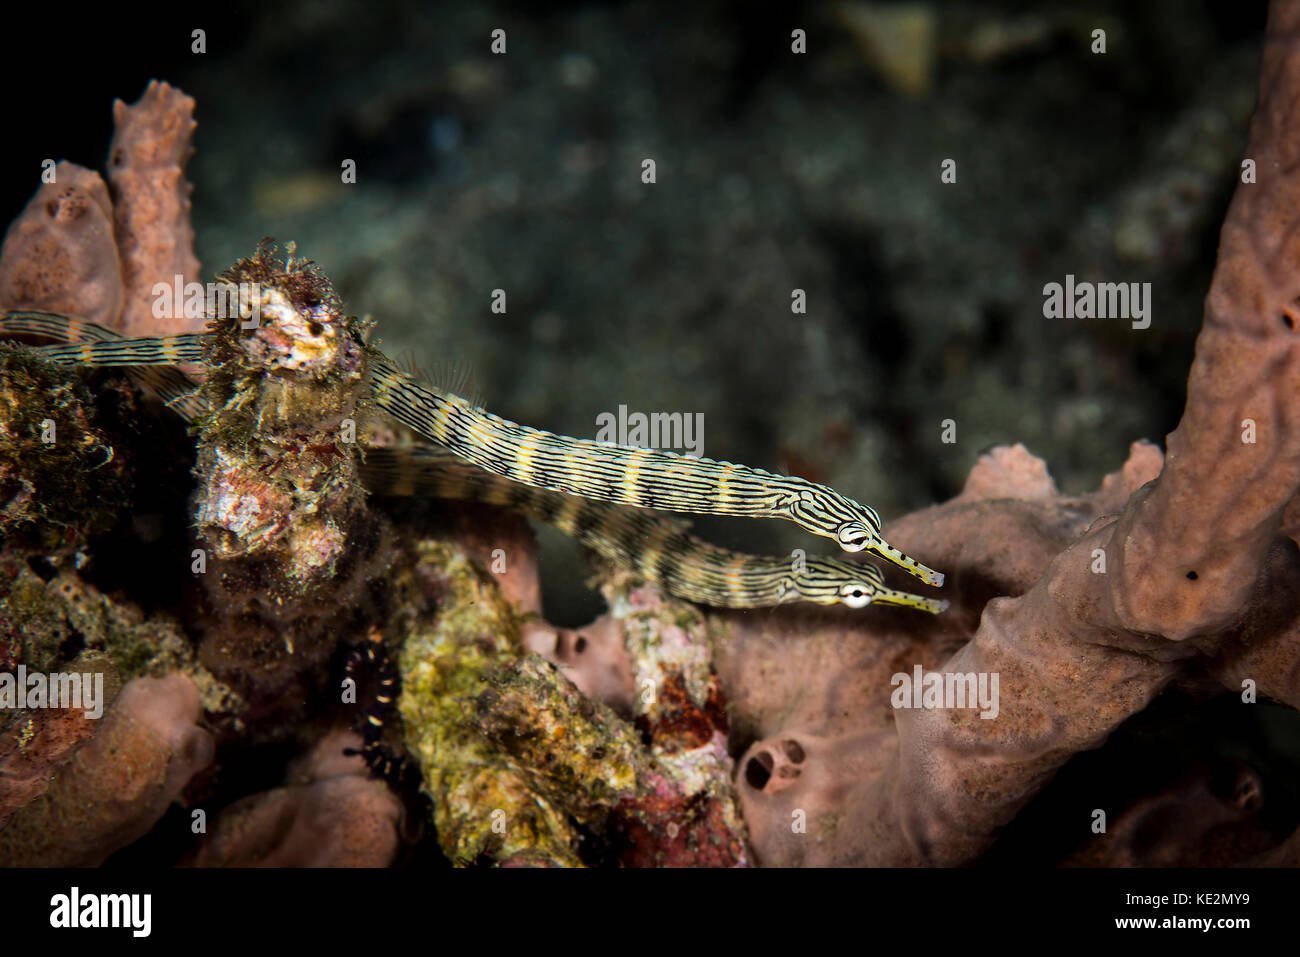 A pair of network pipefish swimming the reef, Lembeh Strait, Indonesia. Stock Photo